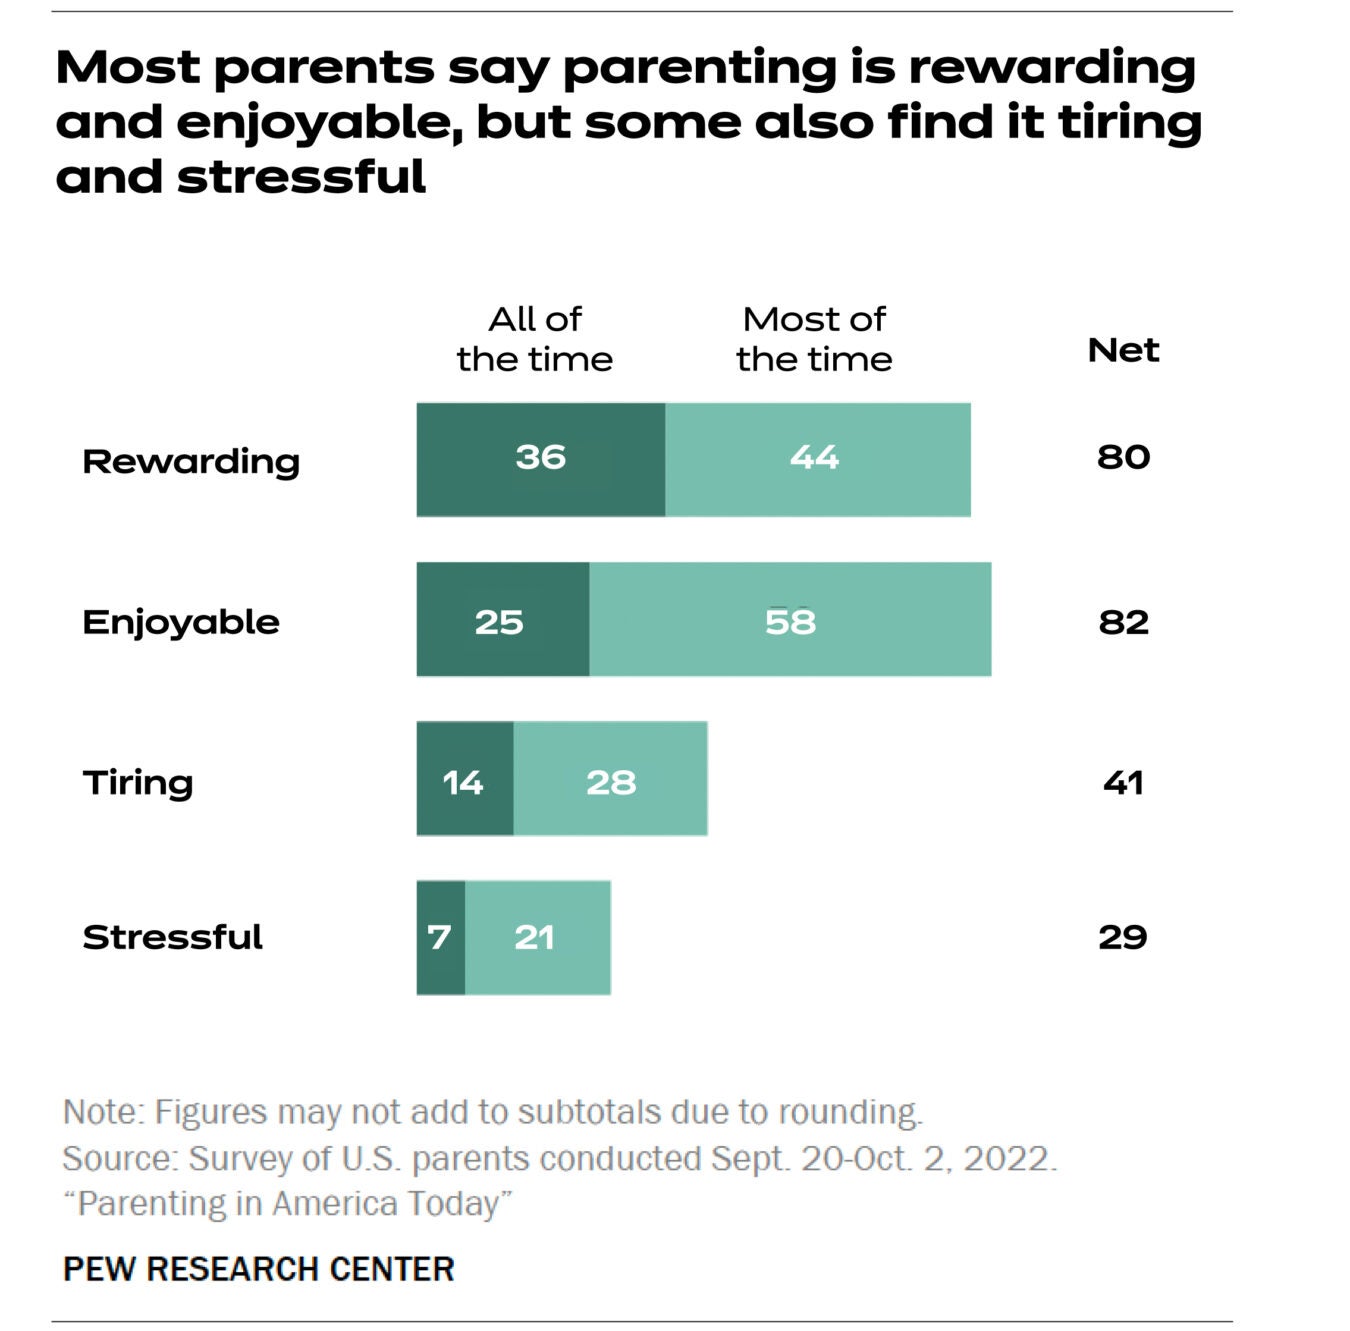 Bar chart of Pew poll shows 80% parents find parenting rewarding; 82% find it enjoyable; 41% tiring; and 29% stressful.